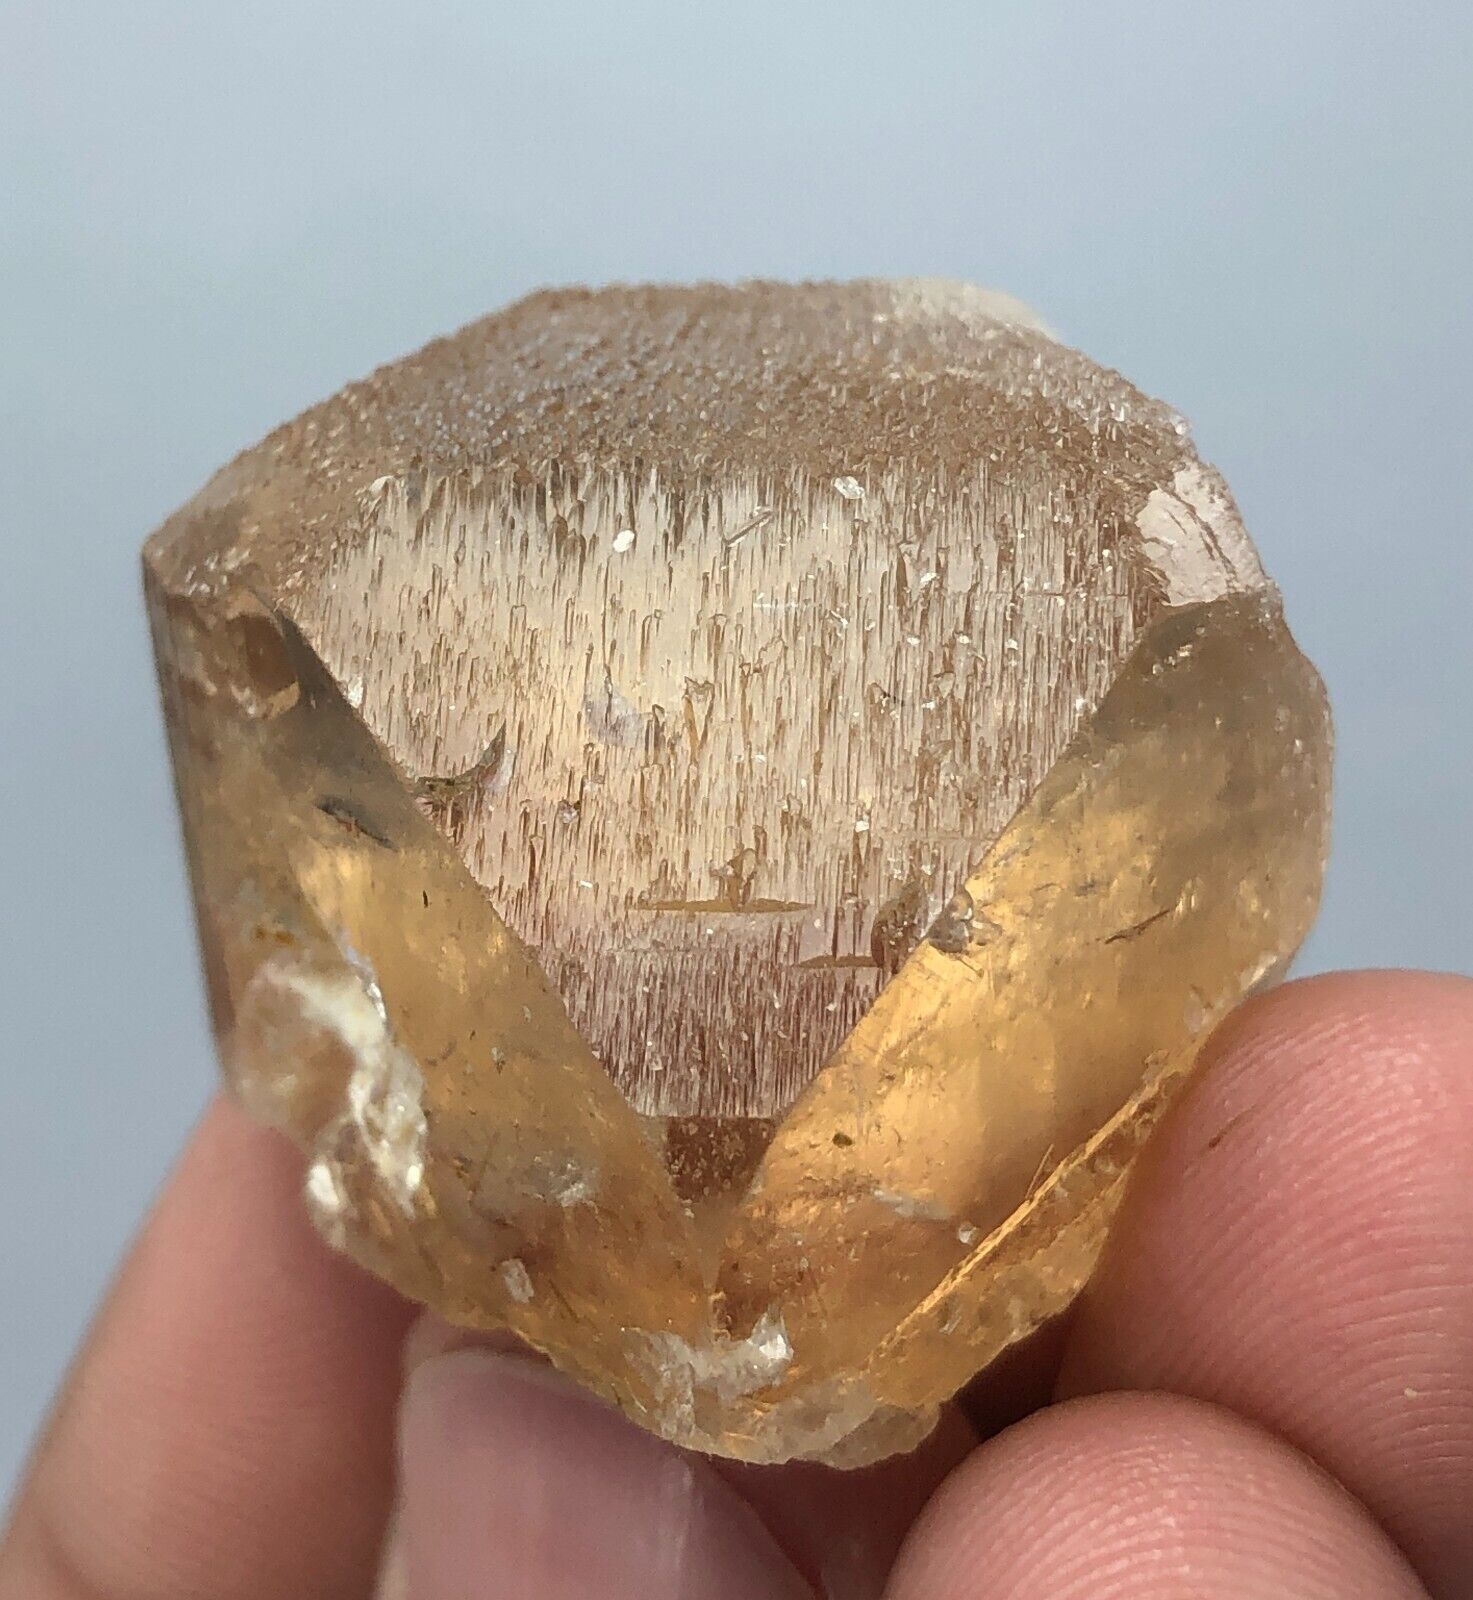 160 Carat. Etched Topaz Fully Terminated Crystal from Skardu Pakistan